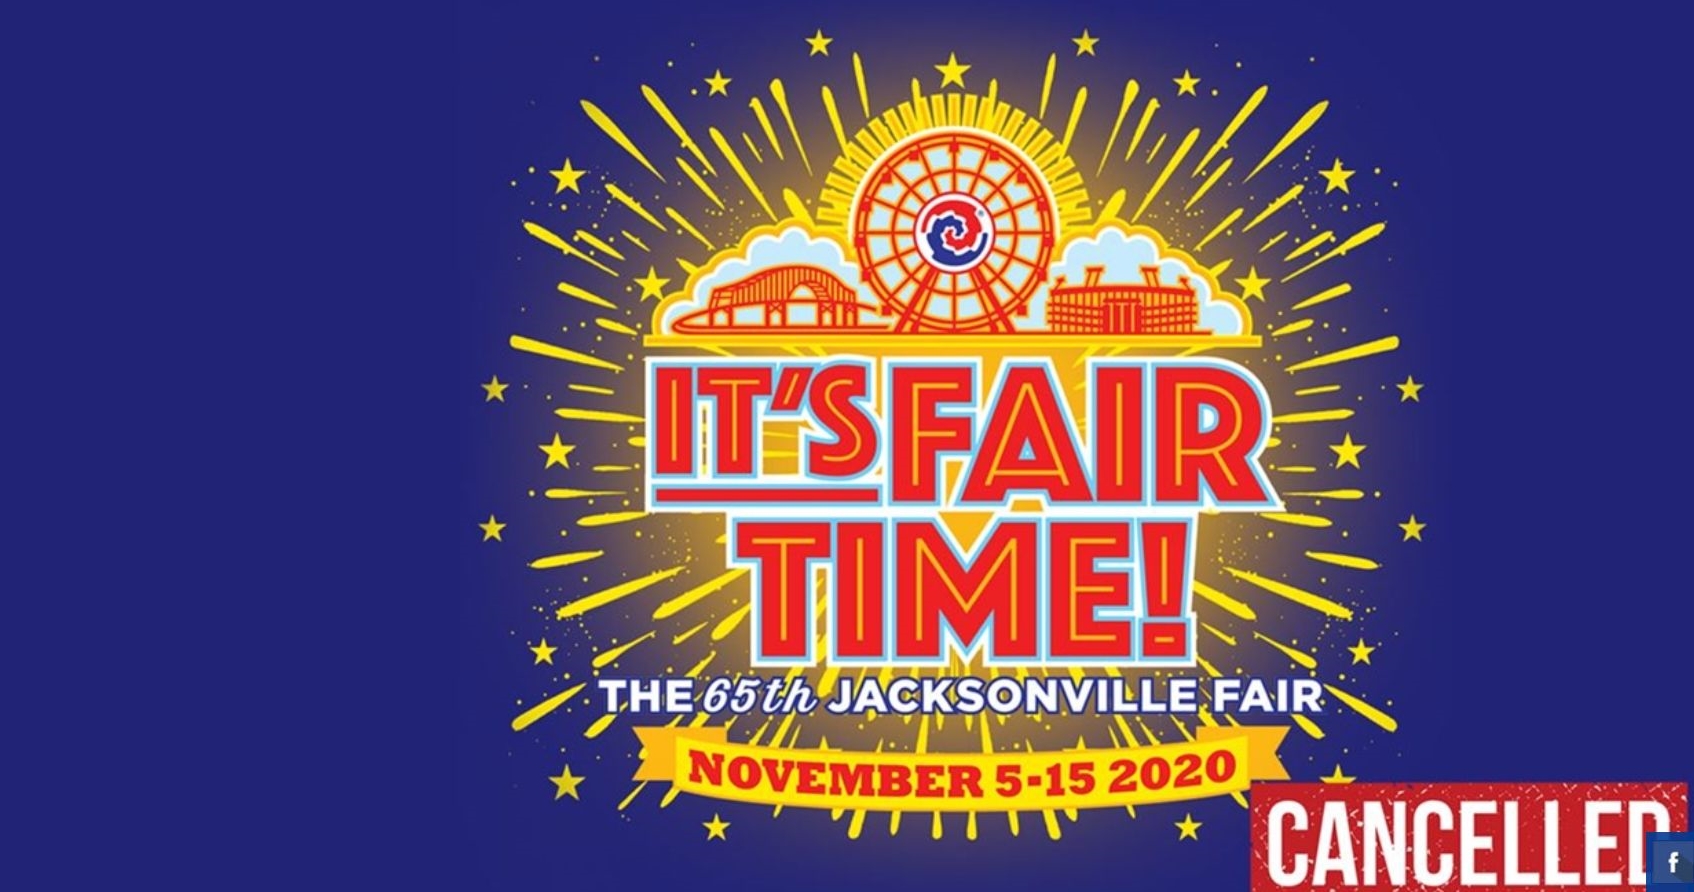 The 65th anniversary of the Jacksonville fair has been cancelled